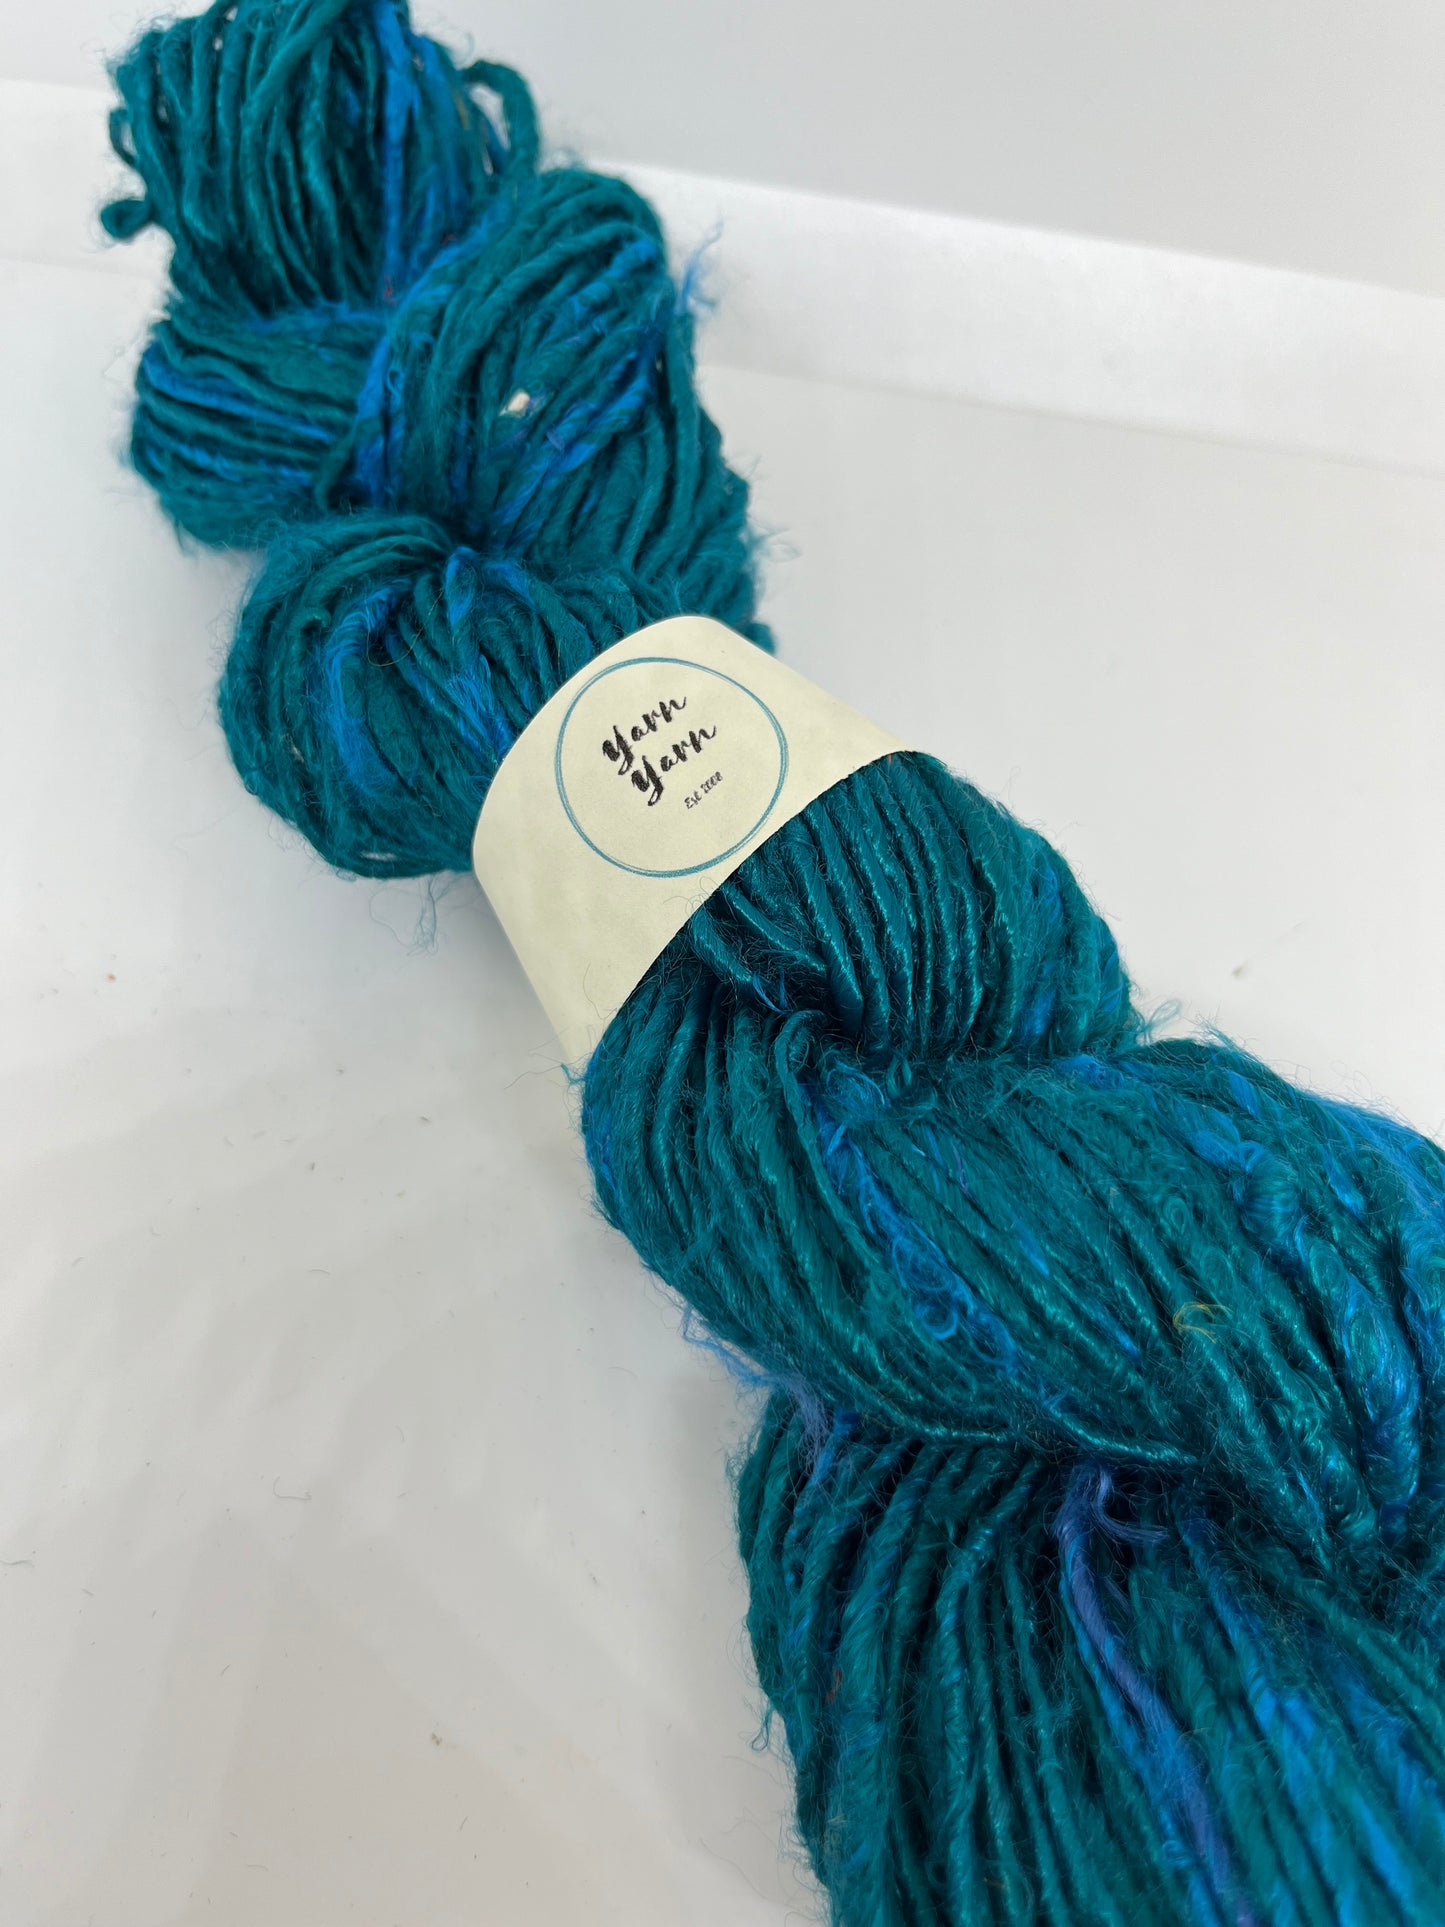 Banana yarn. Teal. Vegan yarn. SOLD OUT SOLD OUT